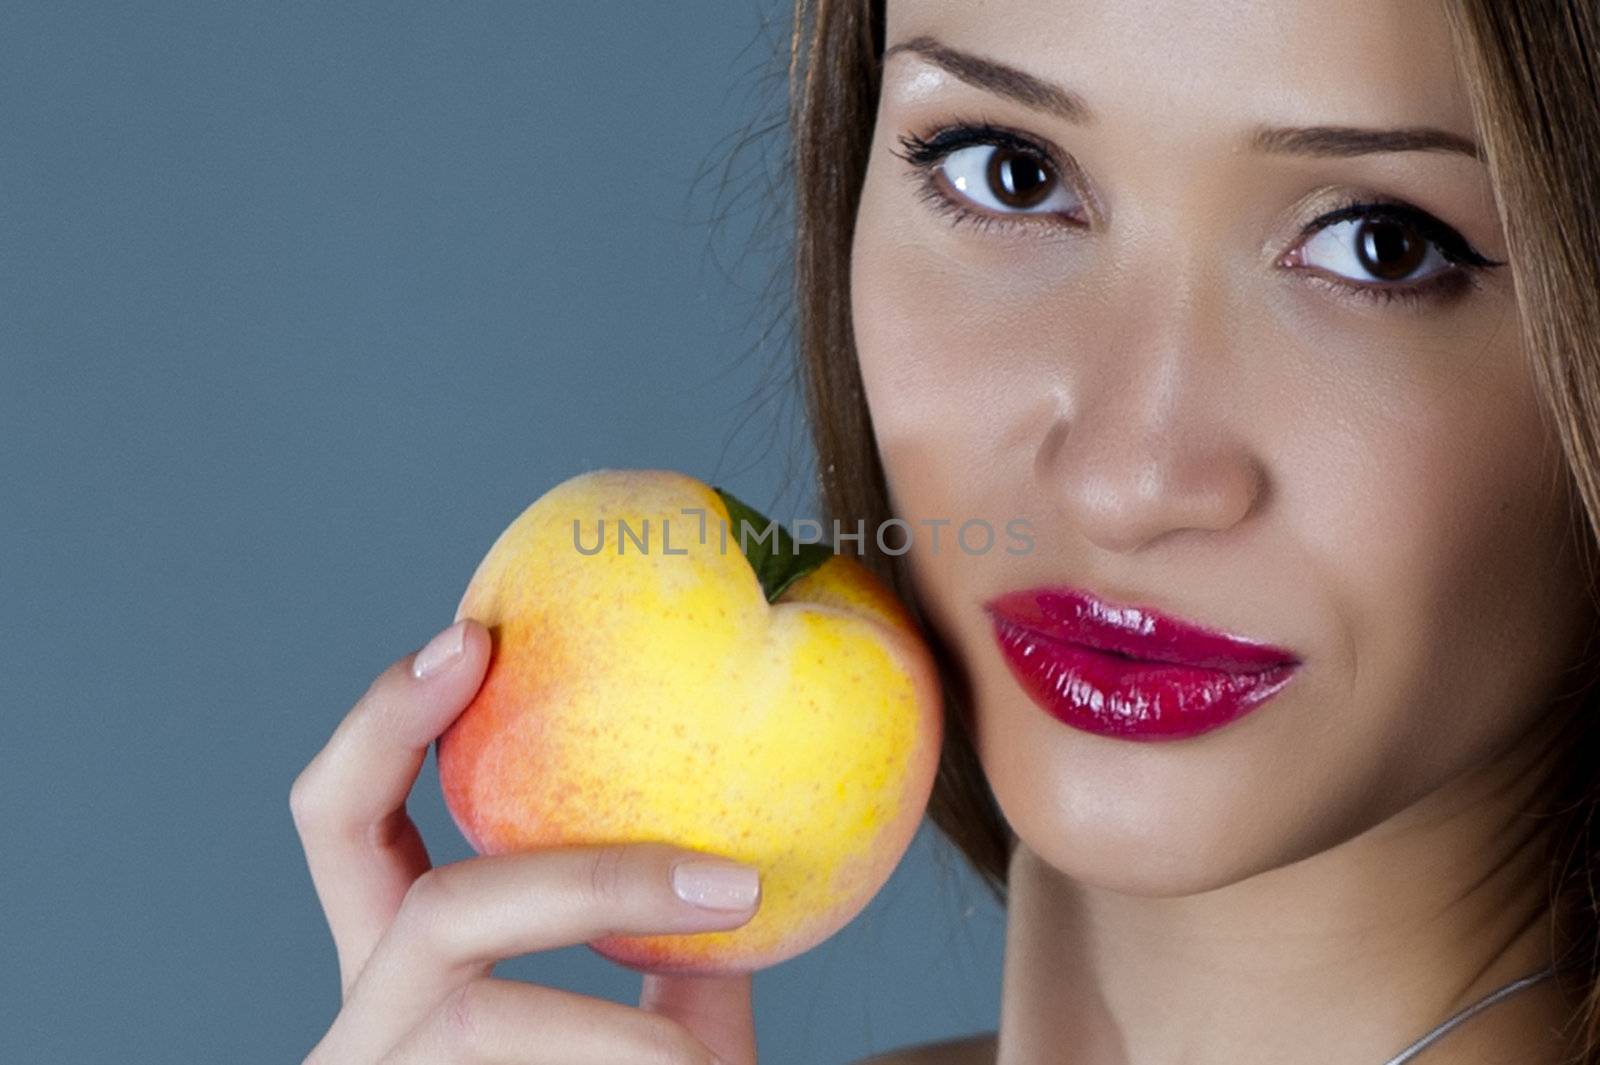 Sexual model with a peach in a hand